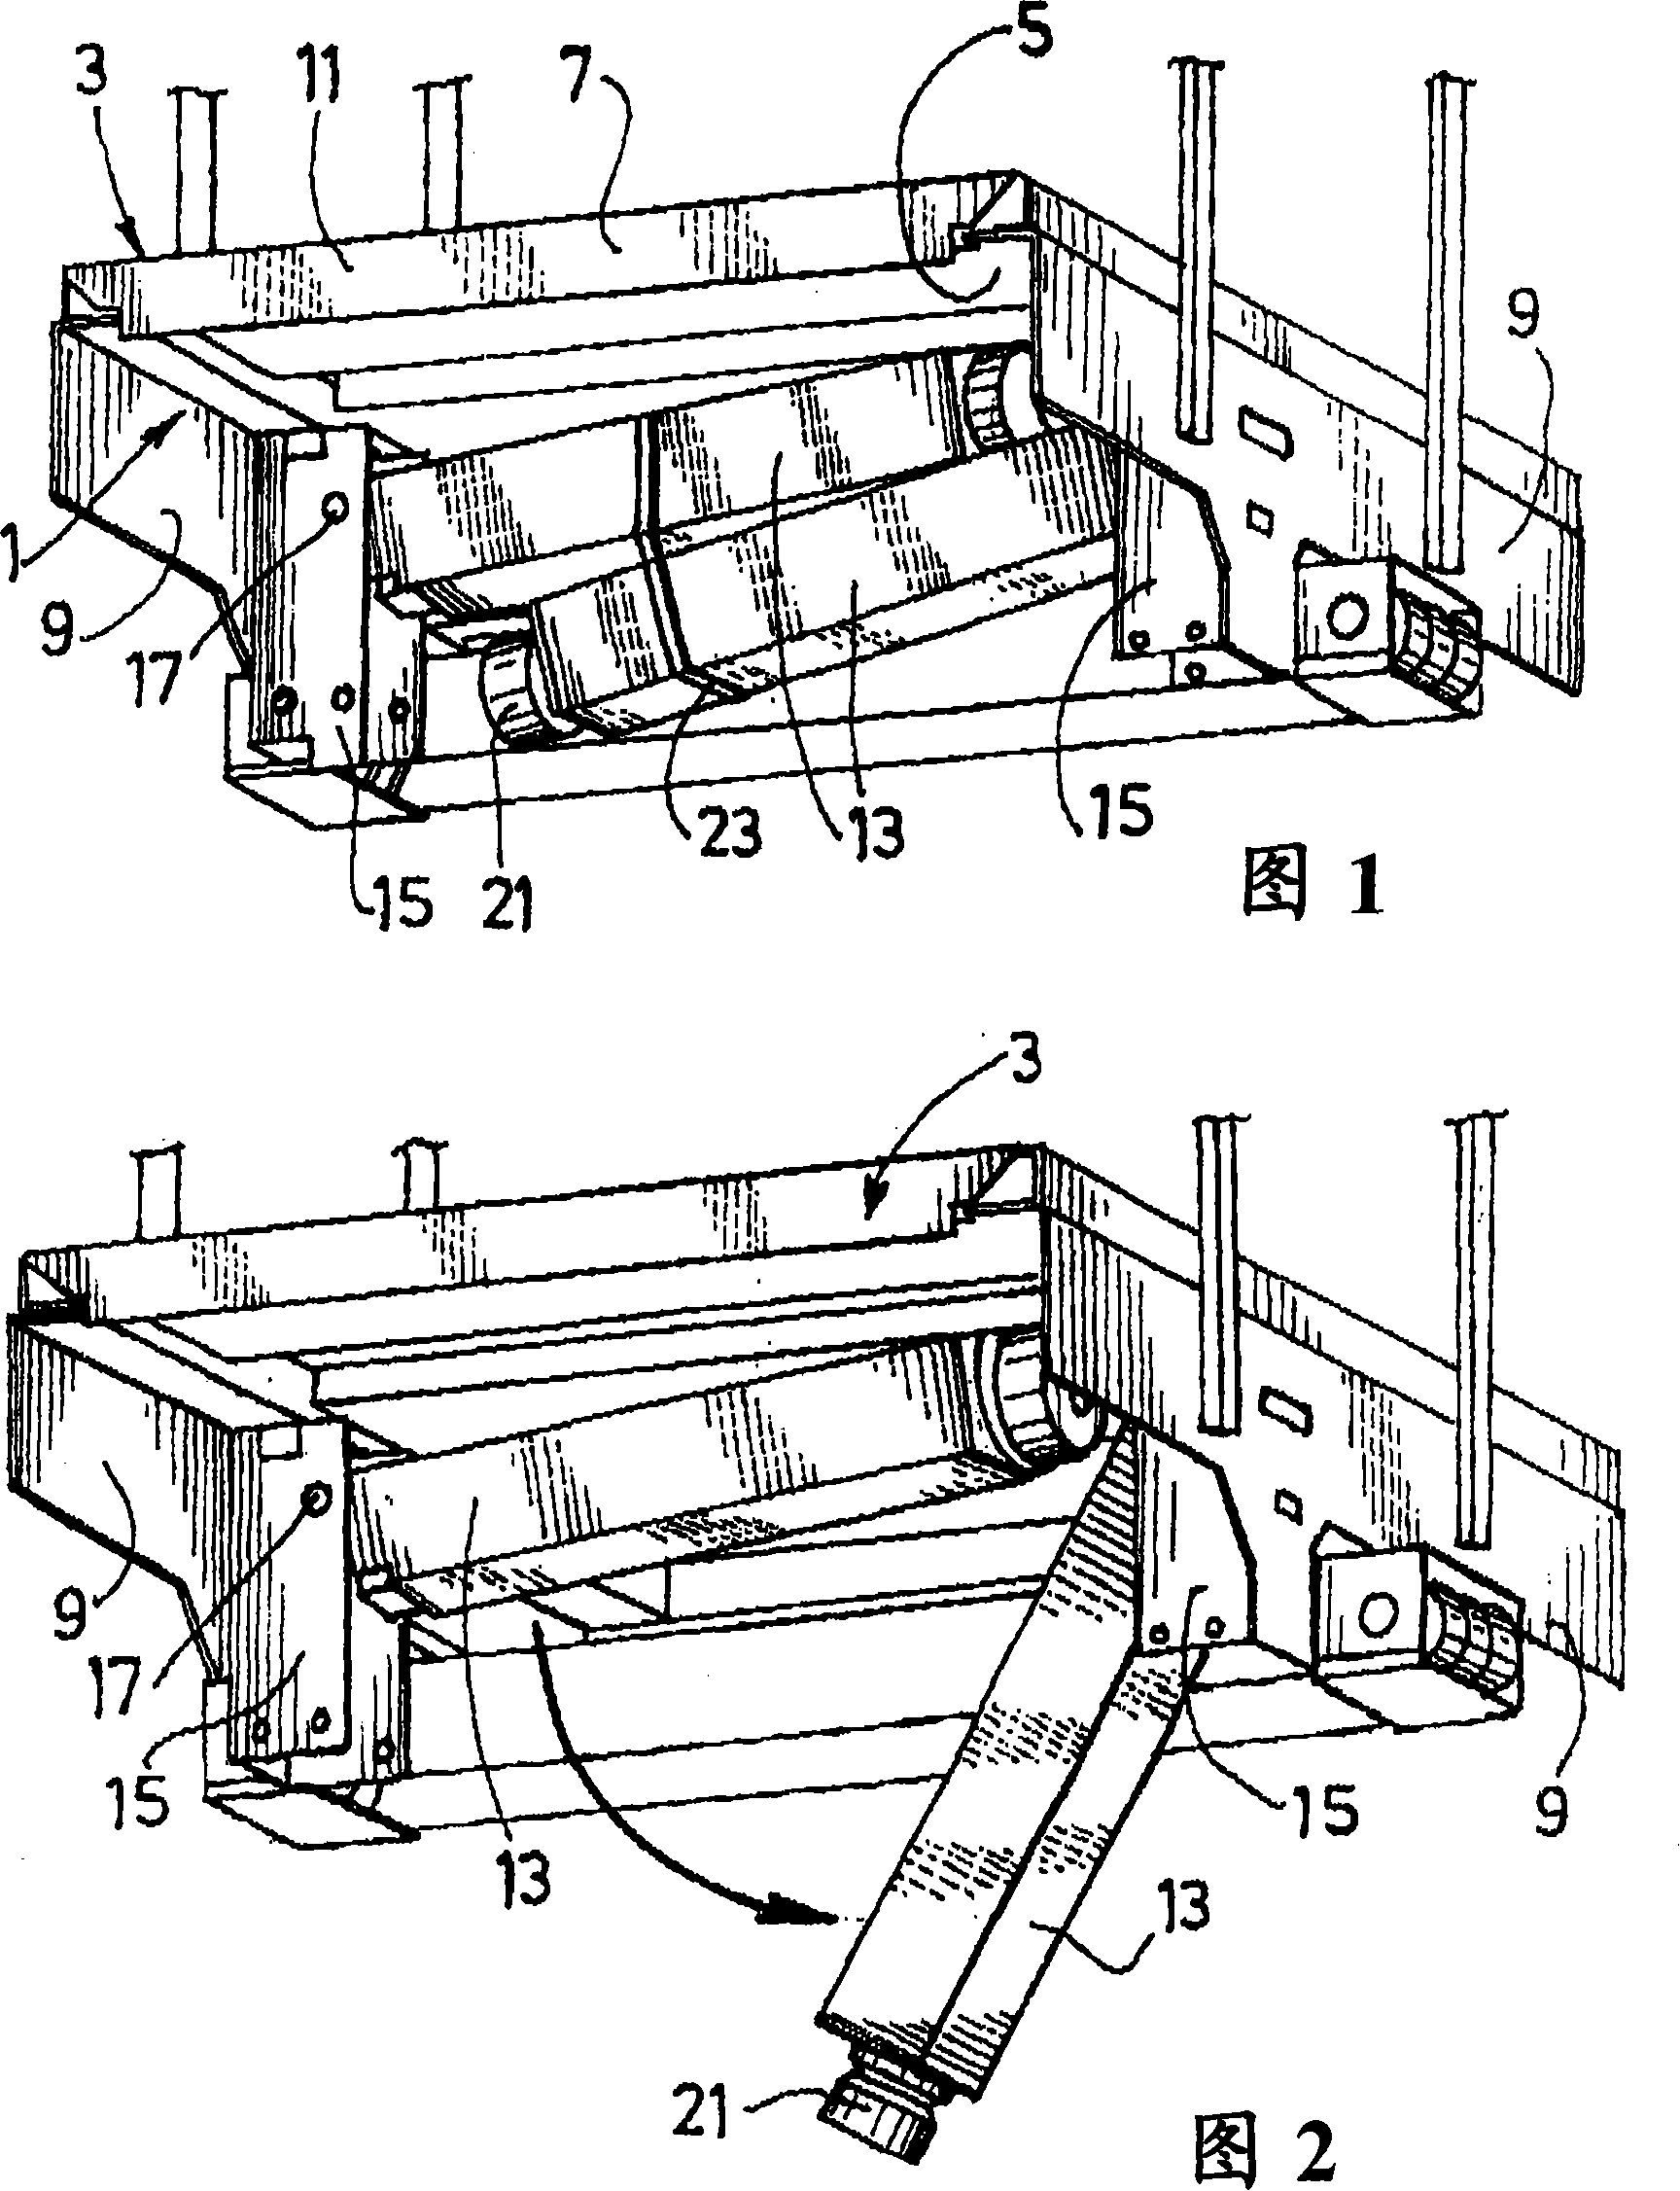 Elevator car with fold-away shock absorbing legs, and the corresponding elevator